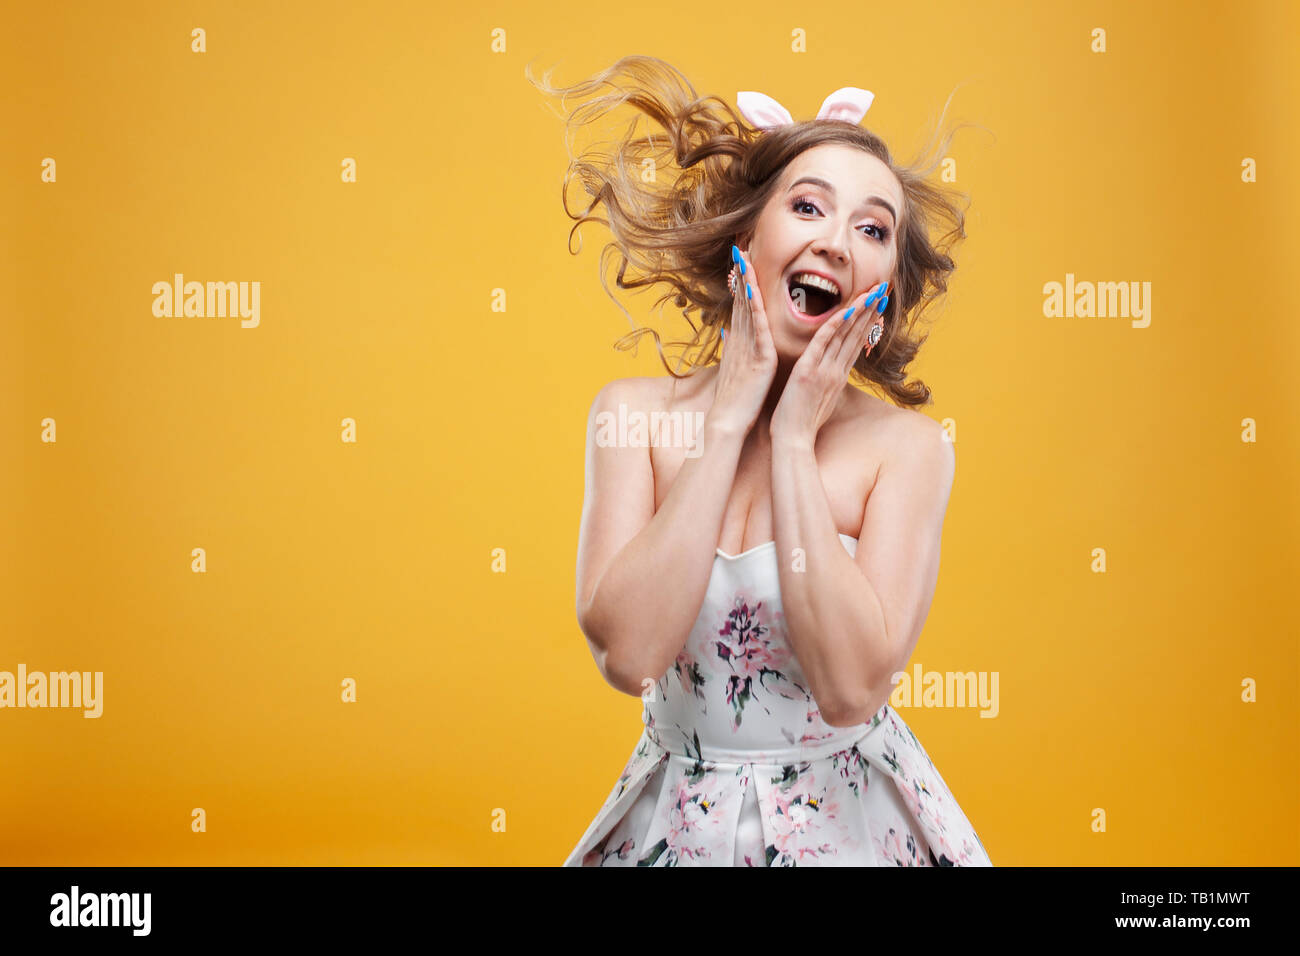 Wow super shock news, portrait of girl in pin up style. Enthusiastic young woman on a cheerful yellow background Stock Photo